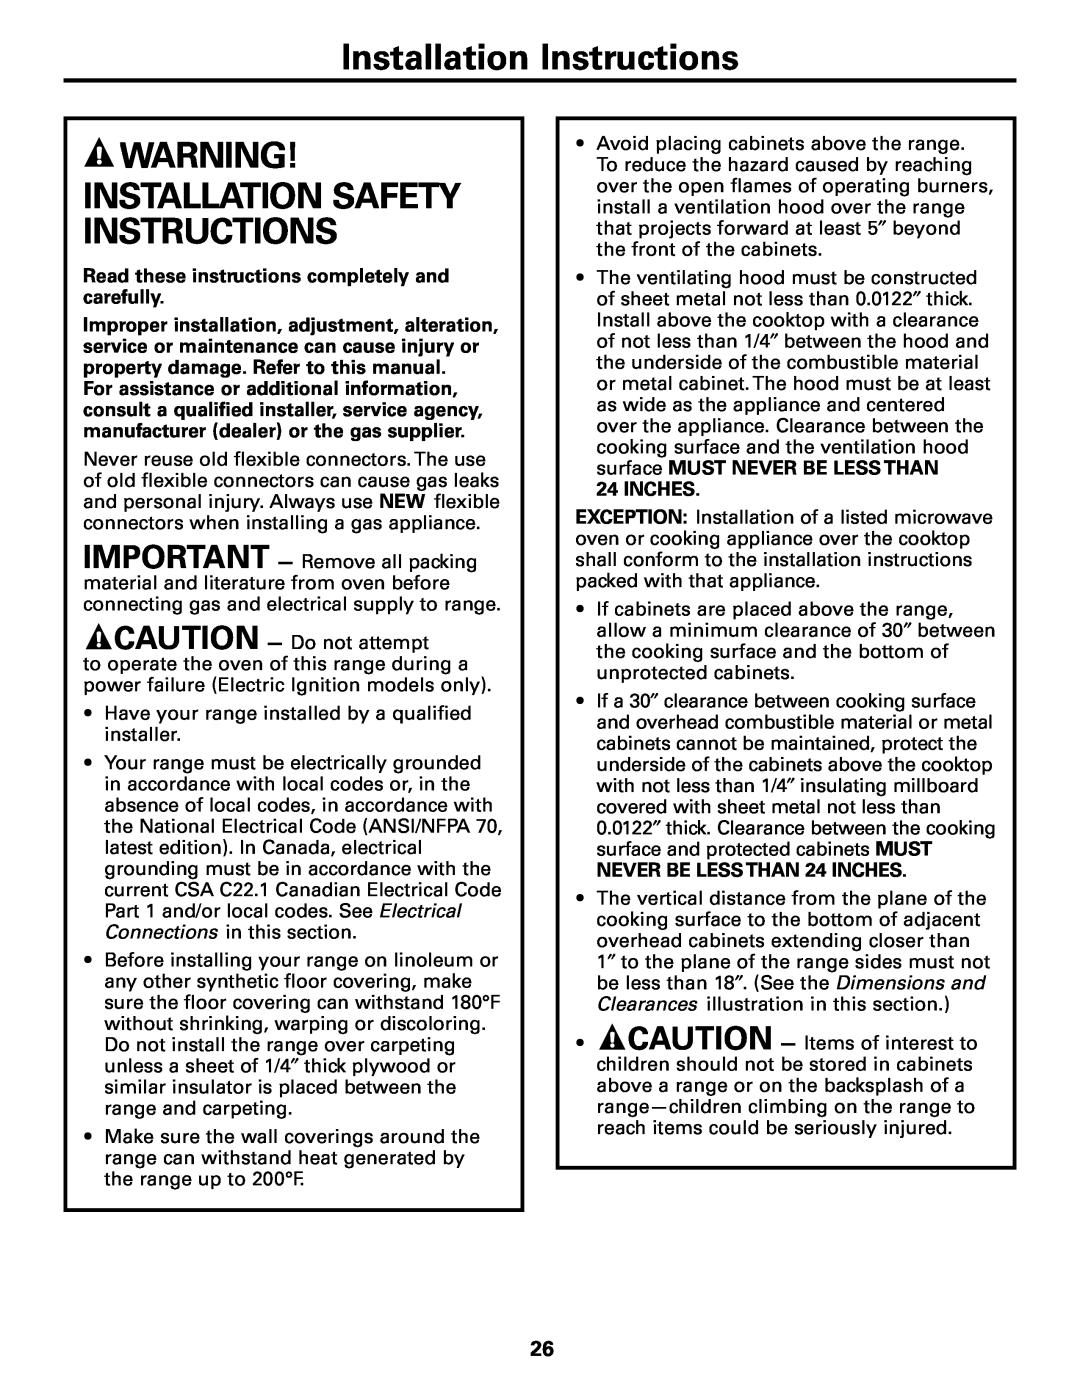 Americana Appliances AGBS300 installation instructions Installation Instructions, Installation Safety Instructions, Inches 